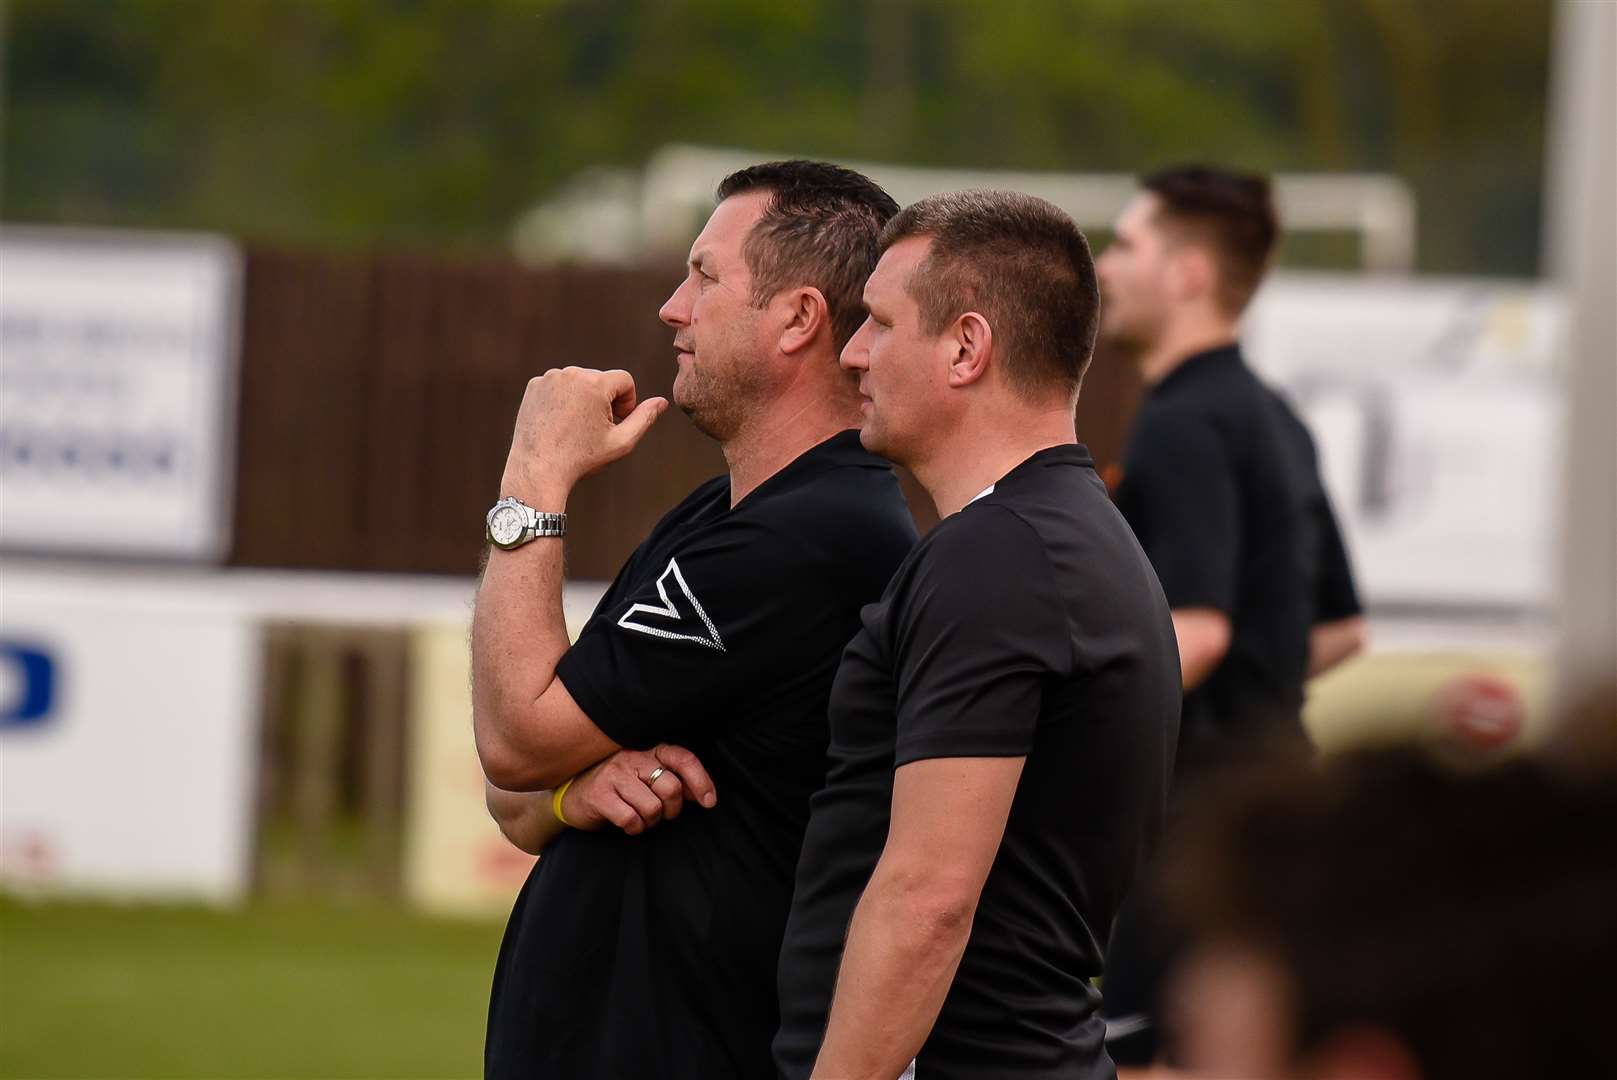 Faverham joint managers Phil Miles and Danny Chapman. Picture: Alan Langley